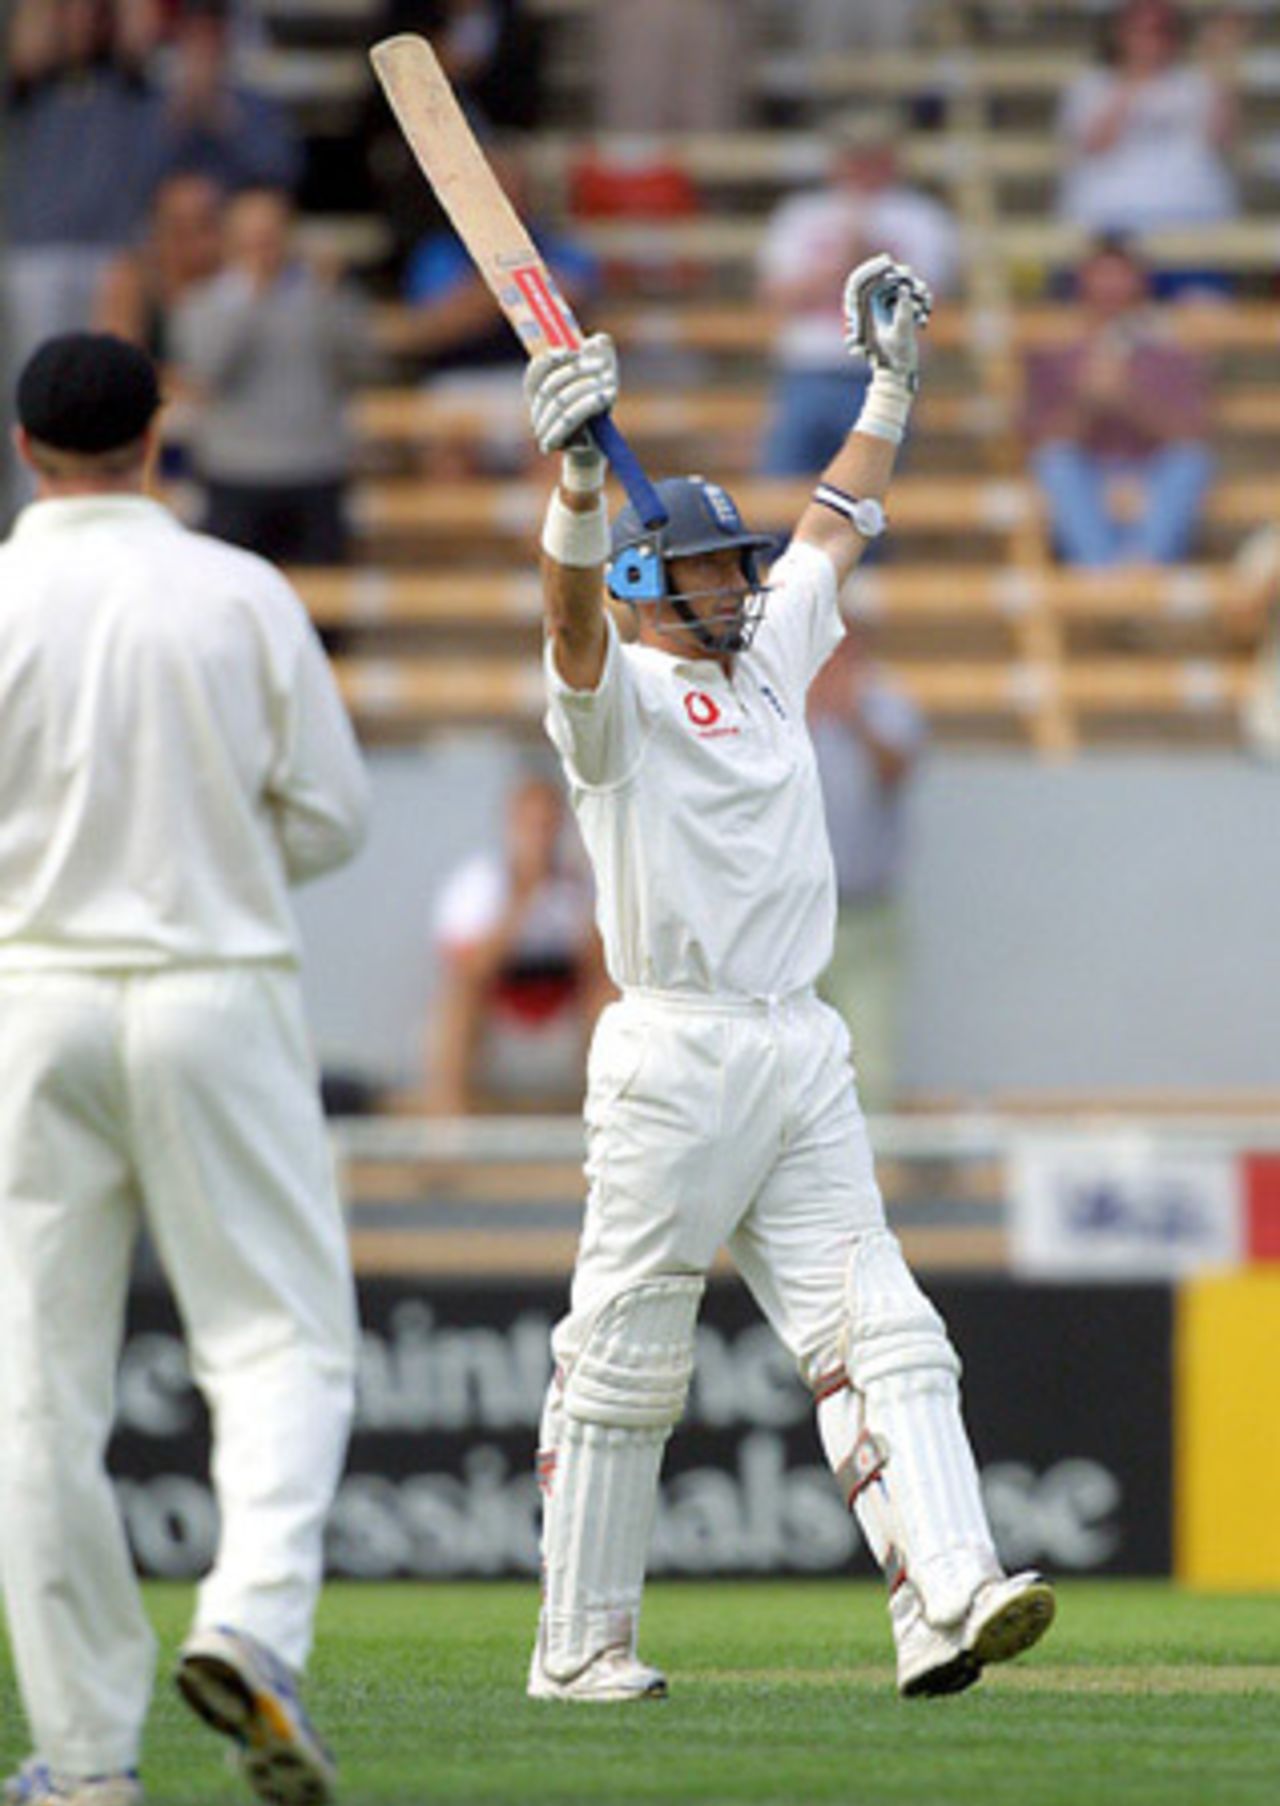 England batsman Nasser Hussain raises his bat to celebrate reaching his century. Hussain went on to score 106 in his first innings. 1st Test: New Zealand v England at Jade Stadium, Christchurch, 13-17 March 2002 (13 March 2002).